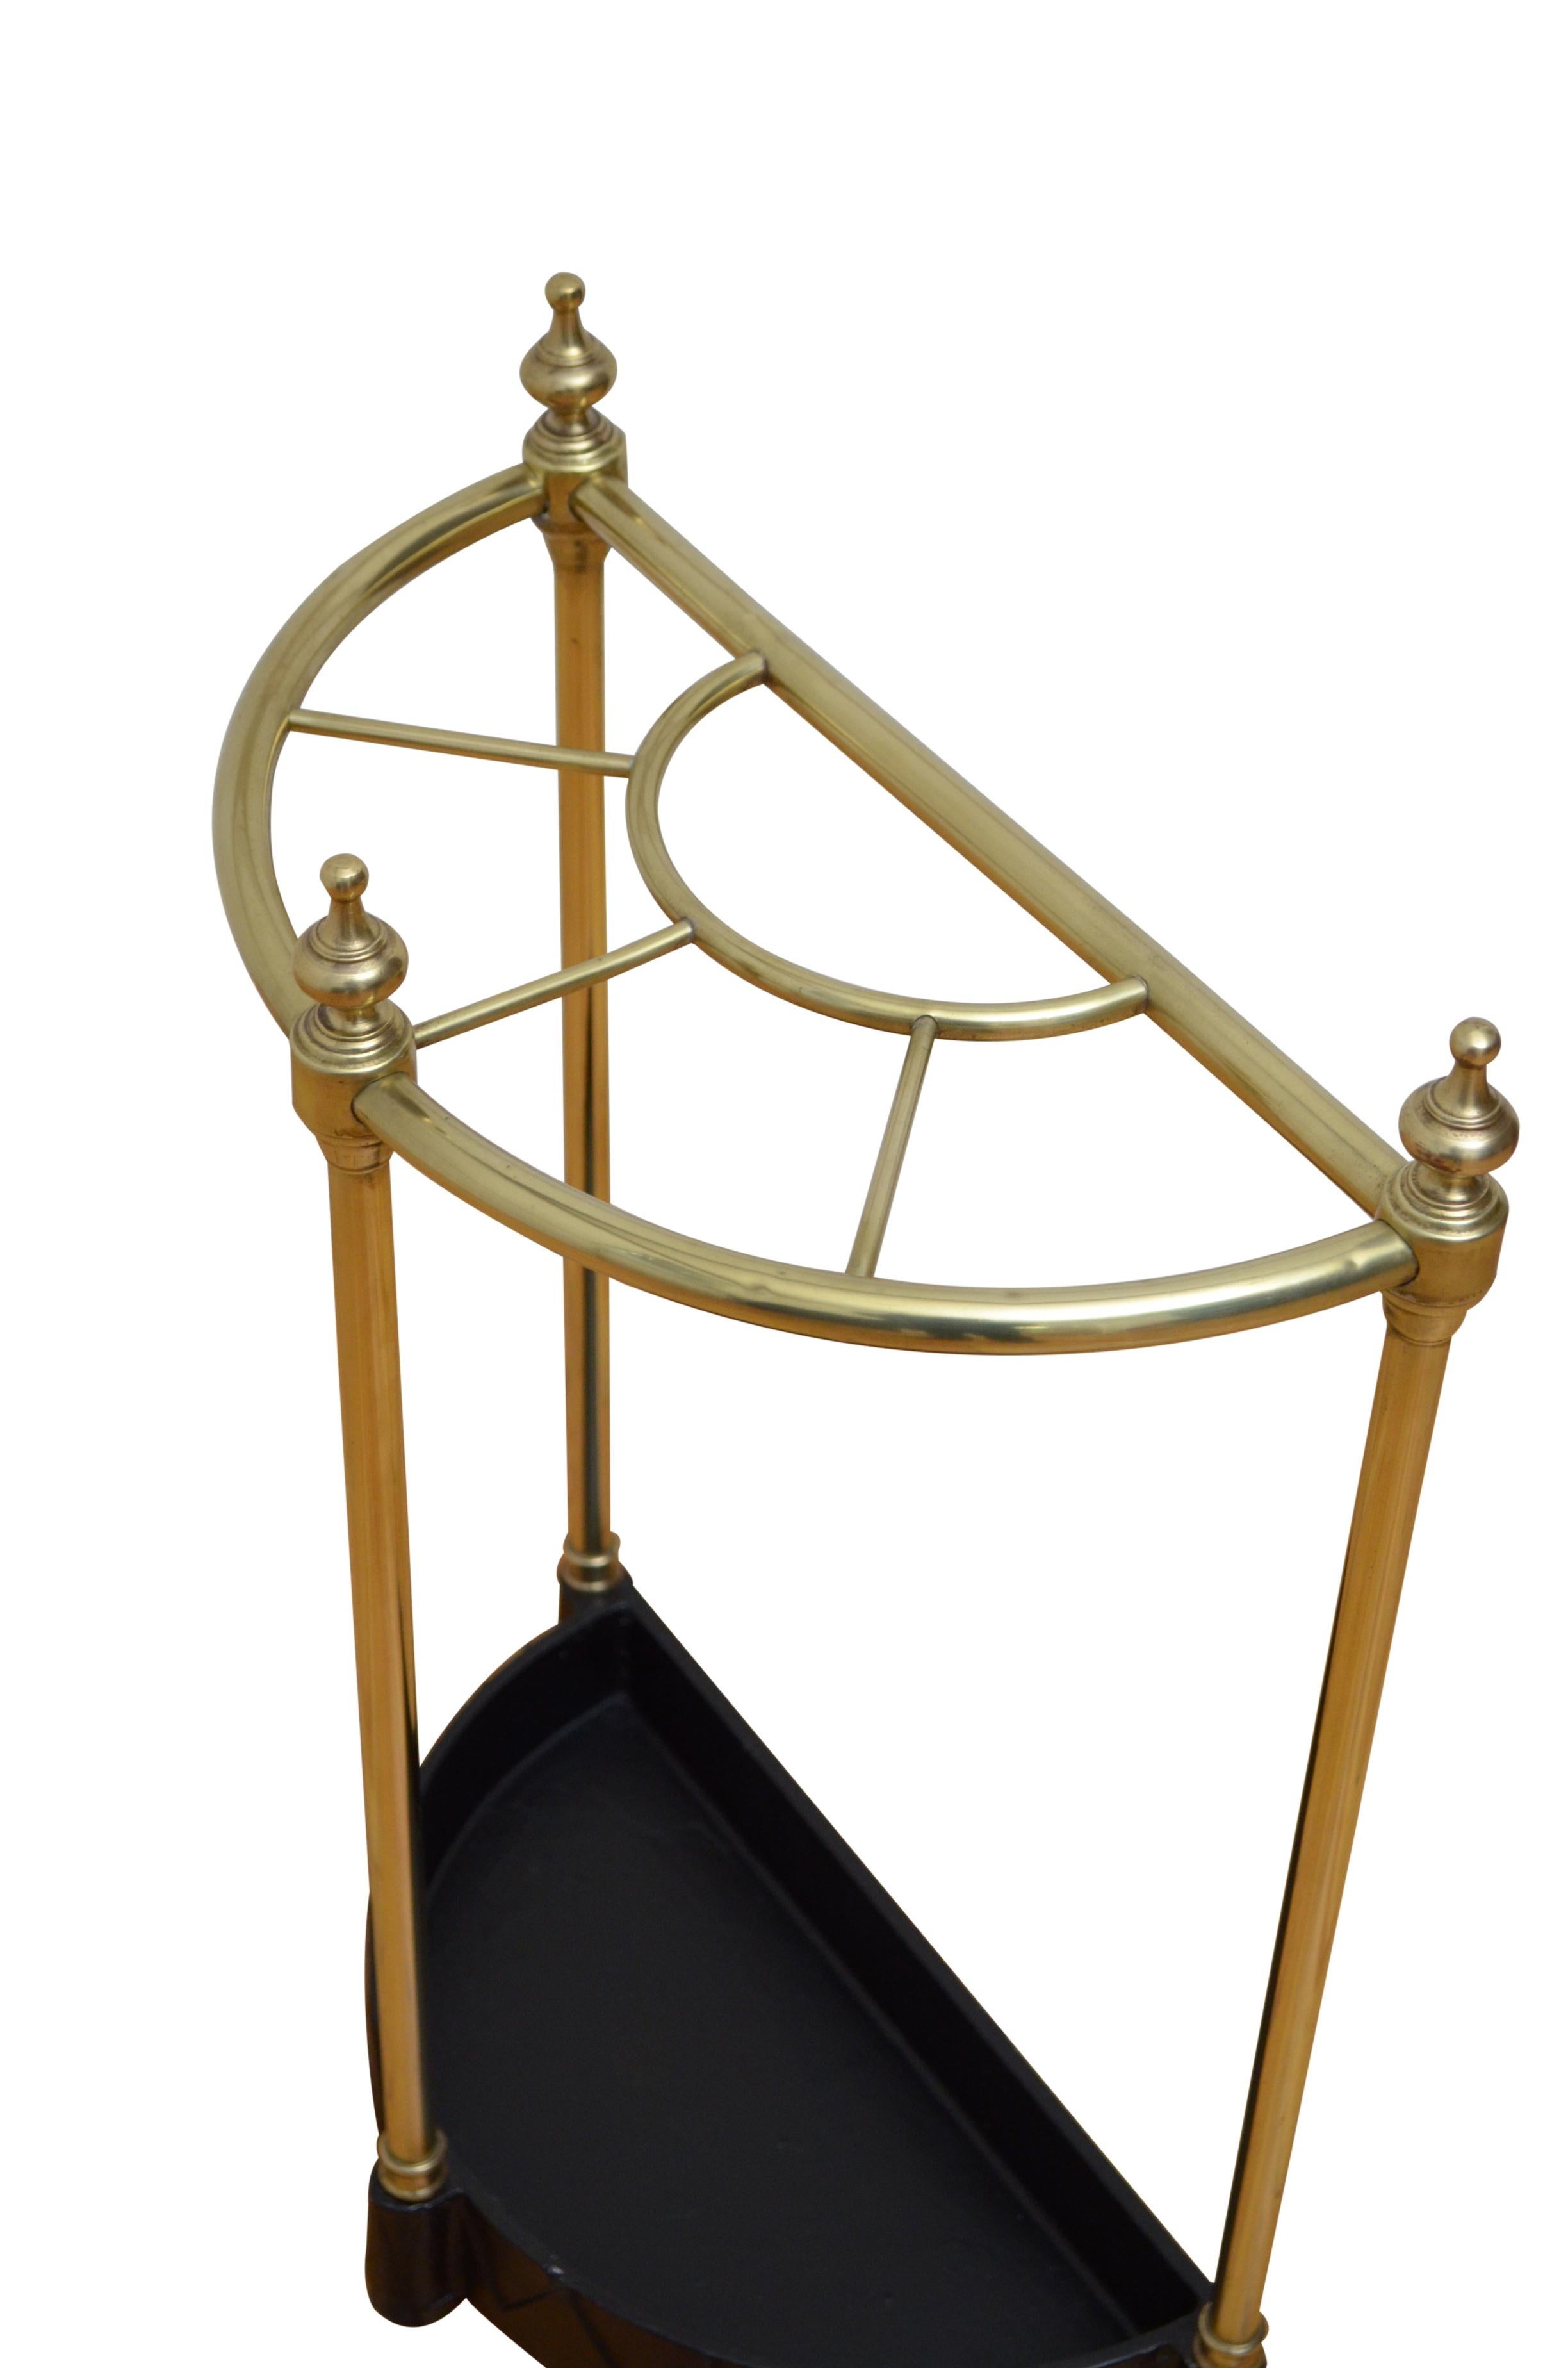 P0249 English half moon umbrella stand in brass, having five divisions with decorative finials and black drip tray with dog tooth decoration. This umbrella stand has been cleaned and polished and is in home ready condition. c1960
Free delivery UK